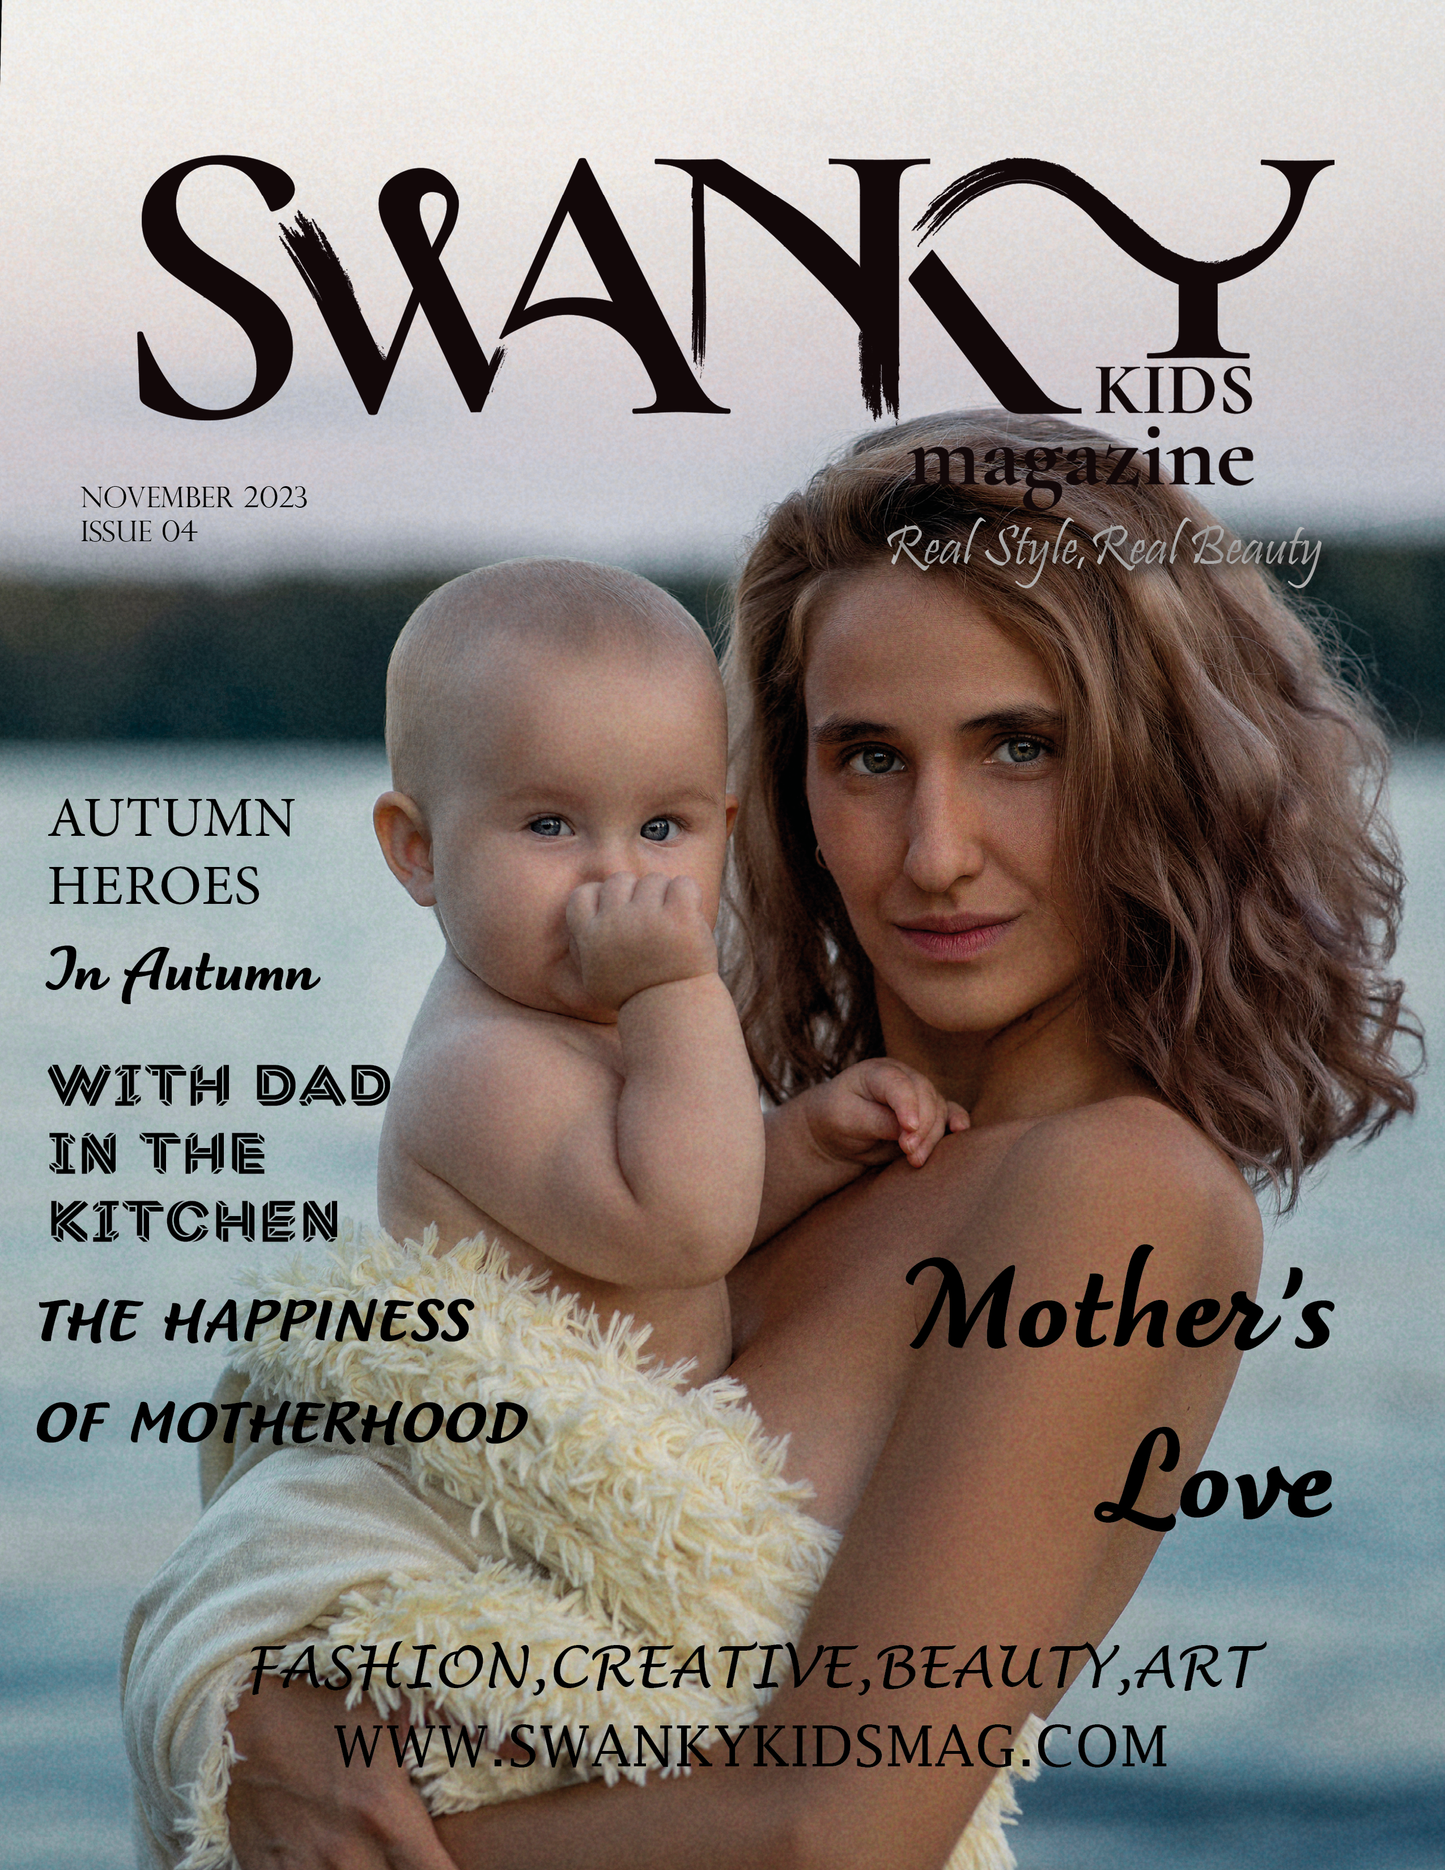 Swanky Kids Magazine - November 2023: The Mother and Baby Edition Issue IV